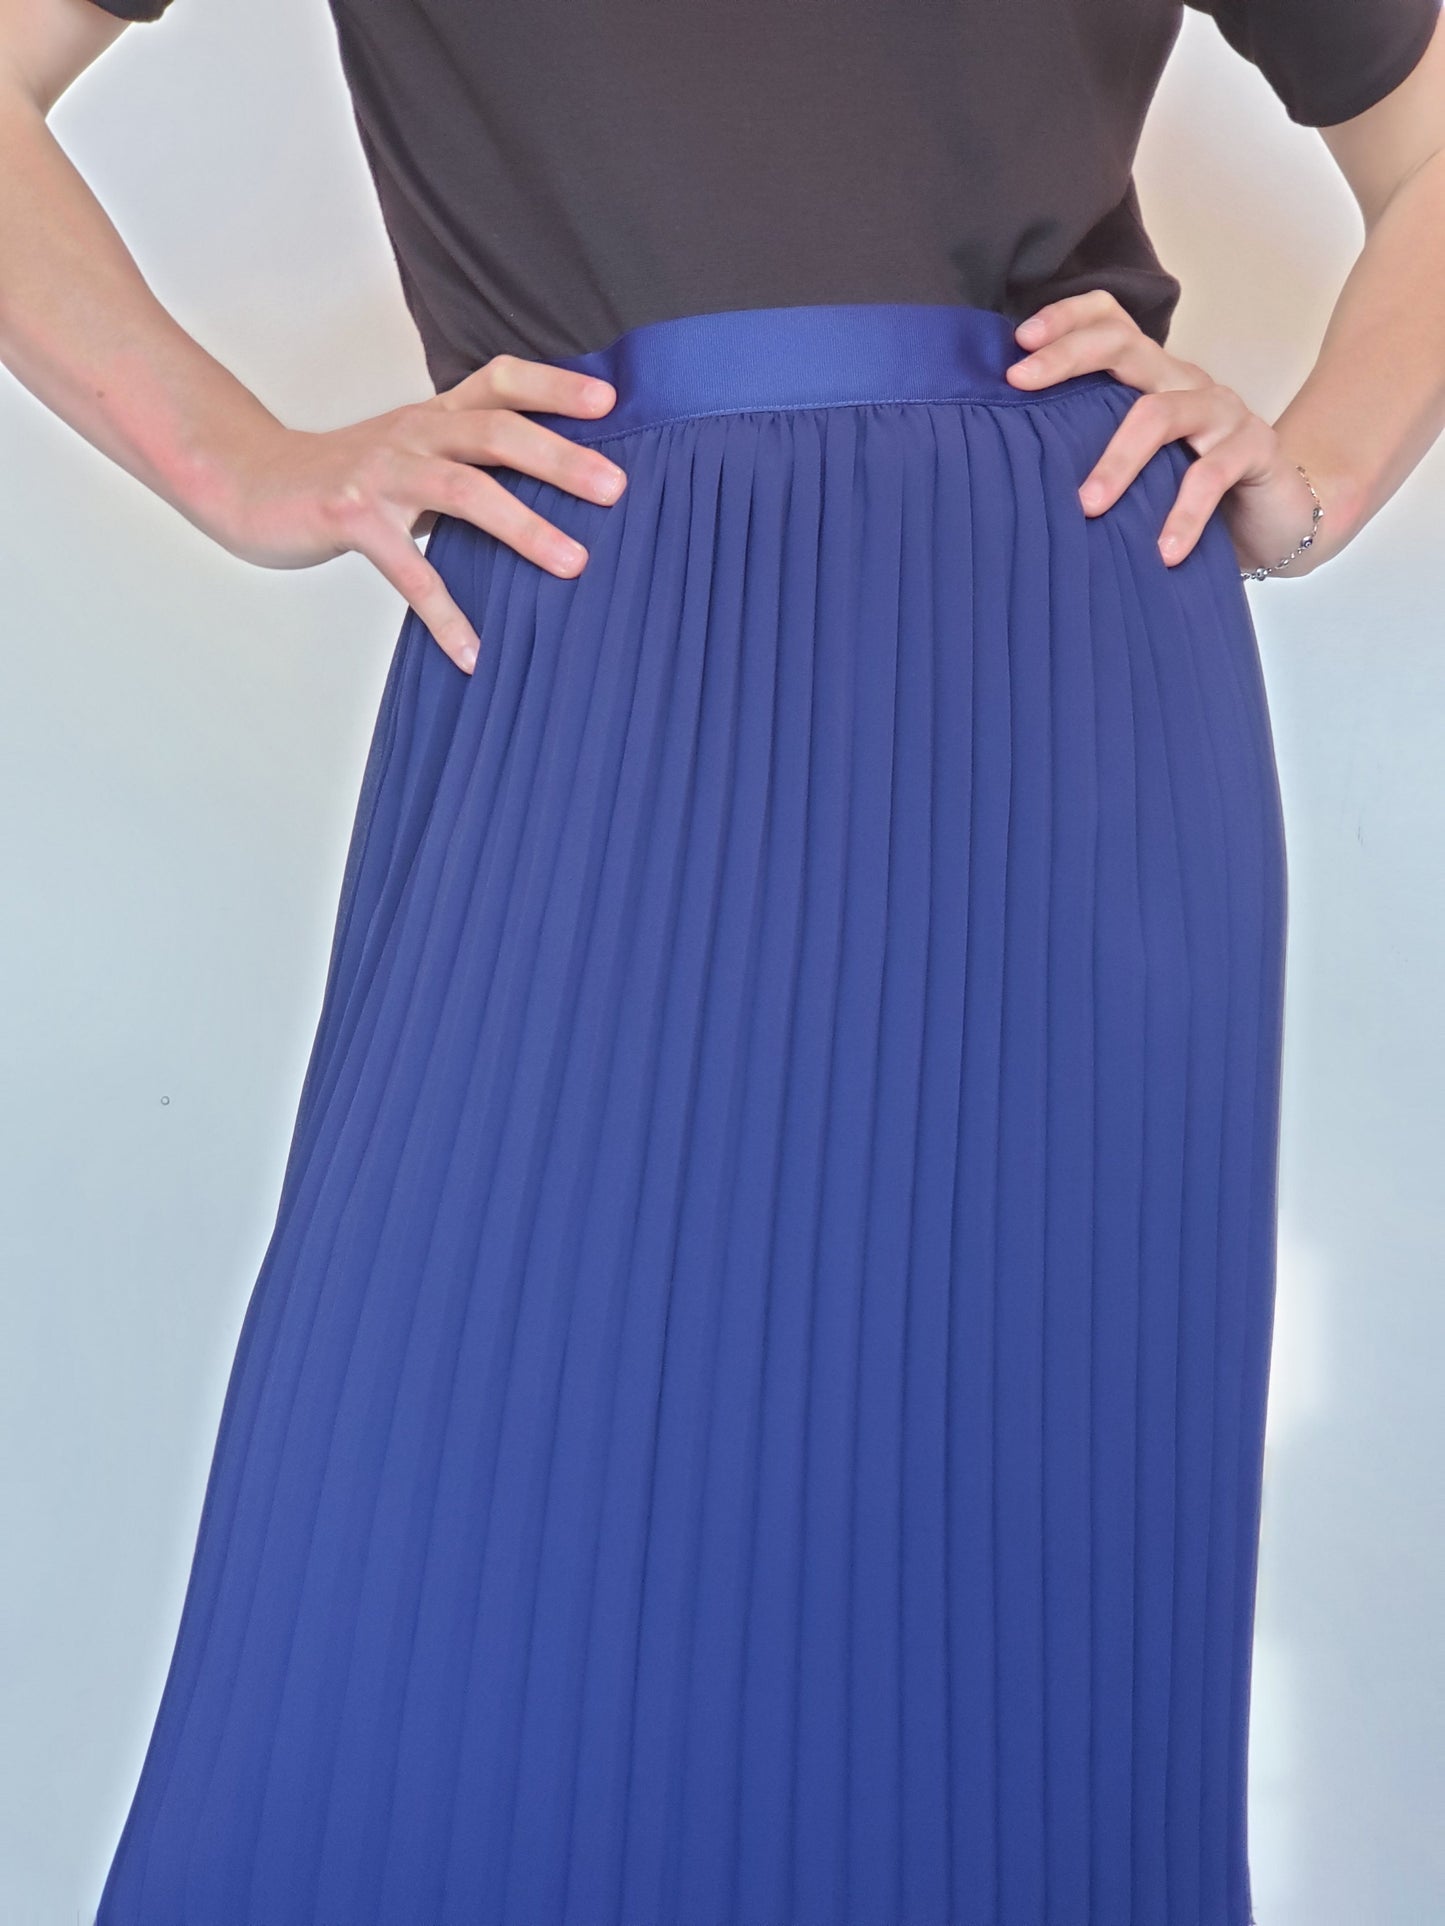 Cobalt Blue Accordion Pleated Double Layer Chiffon Skirt